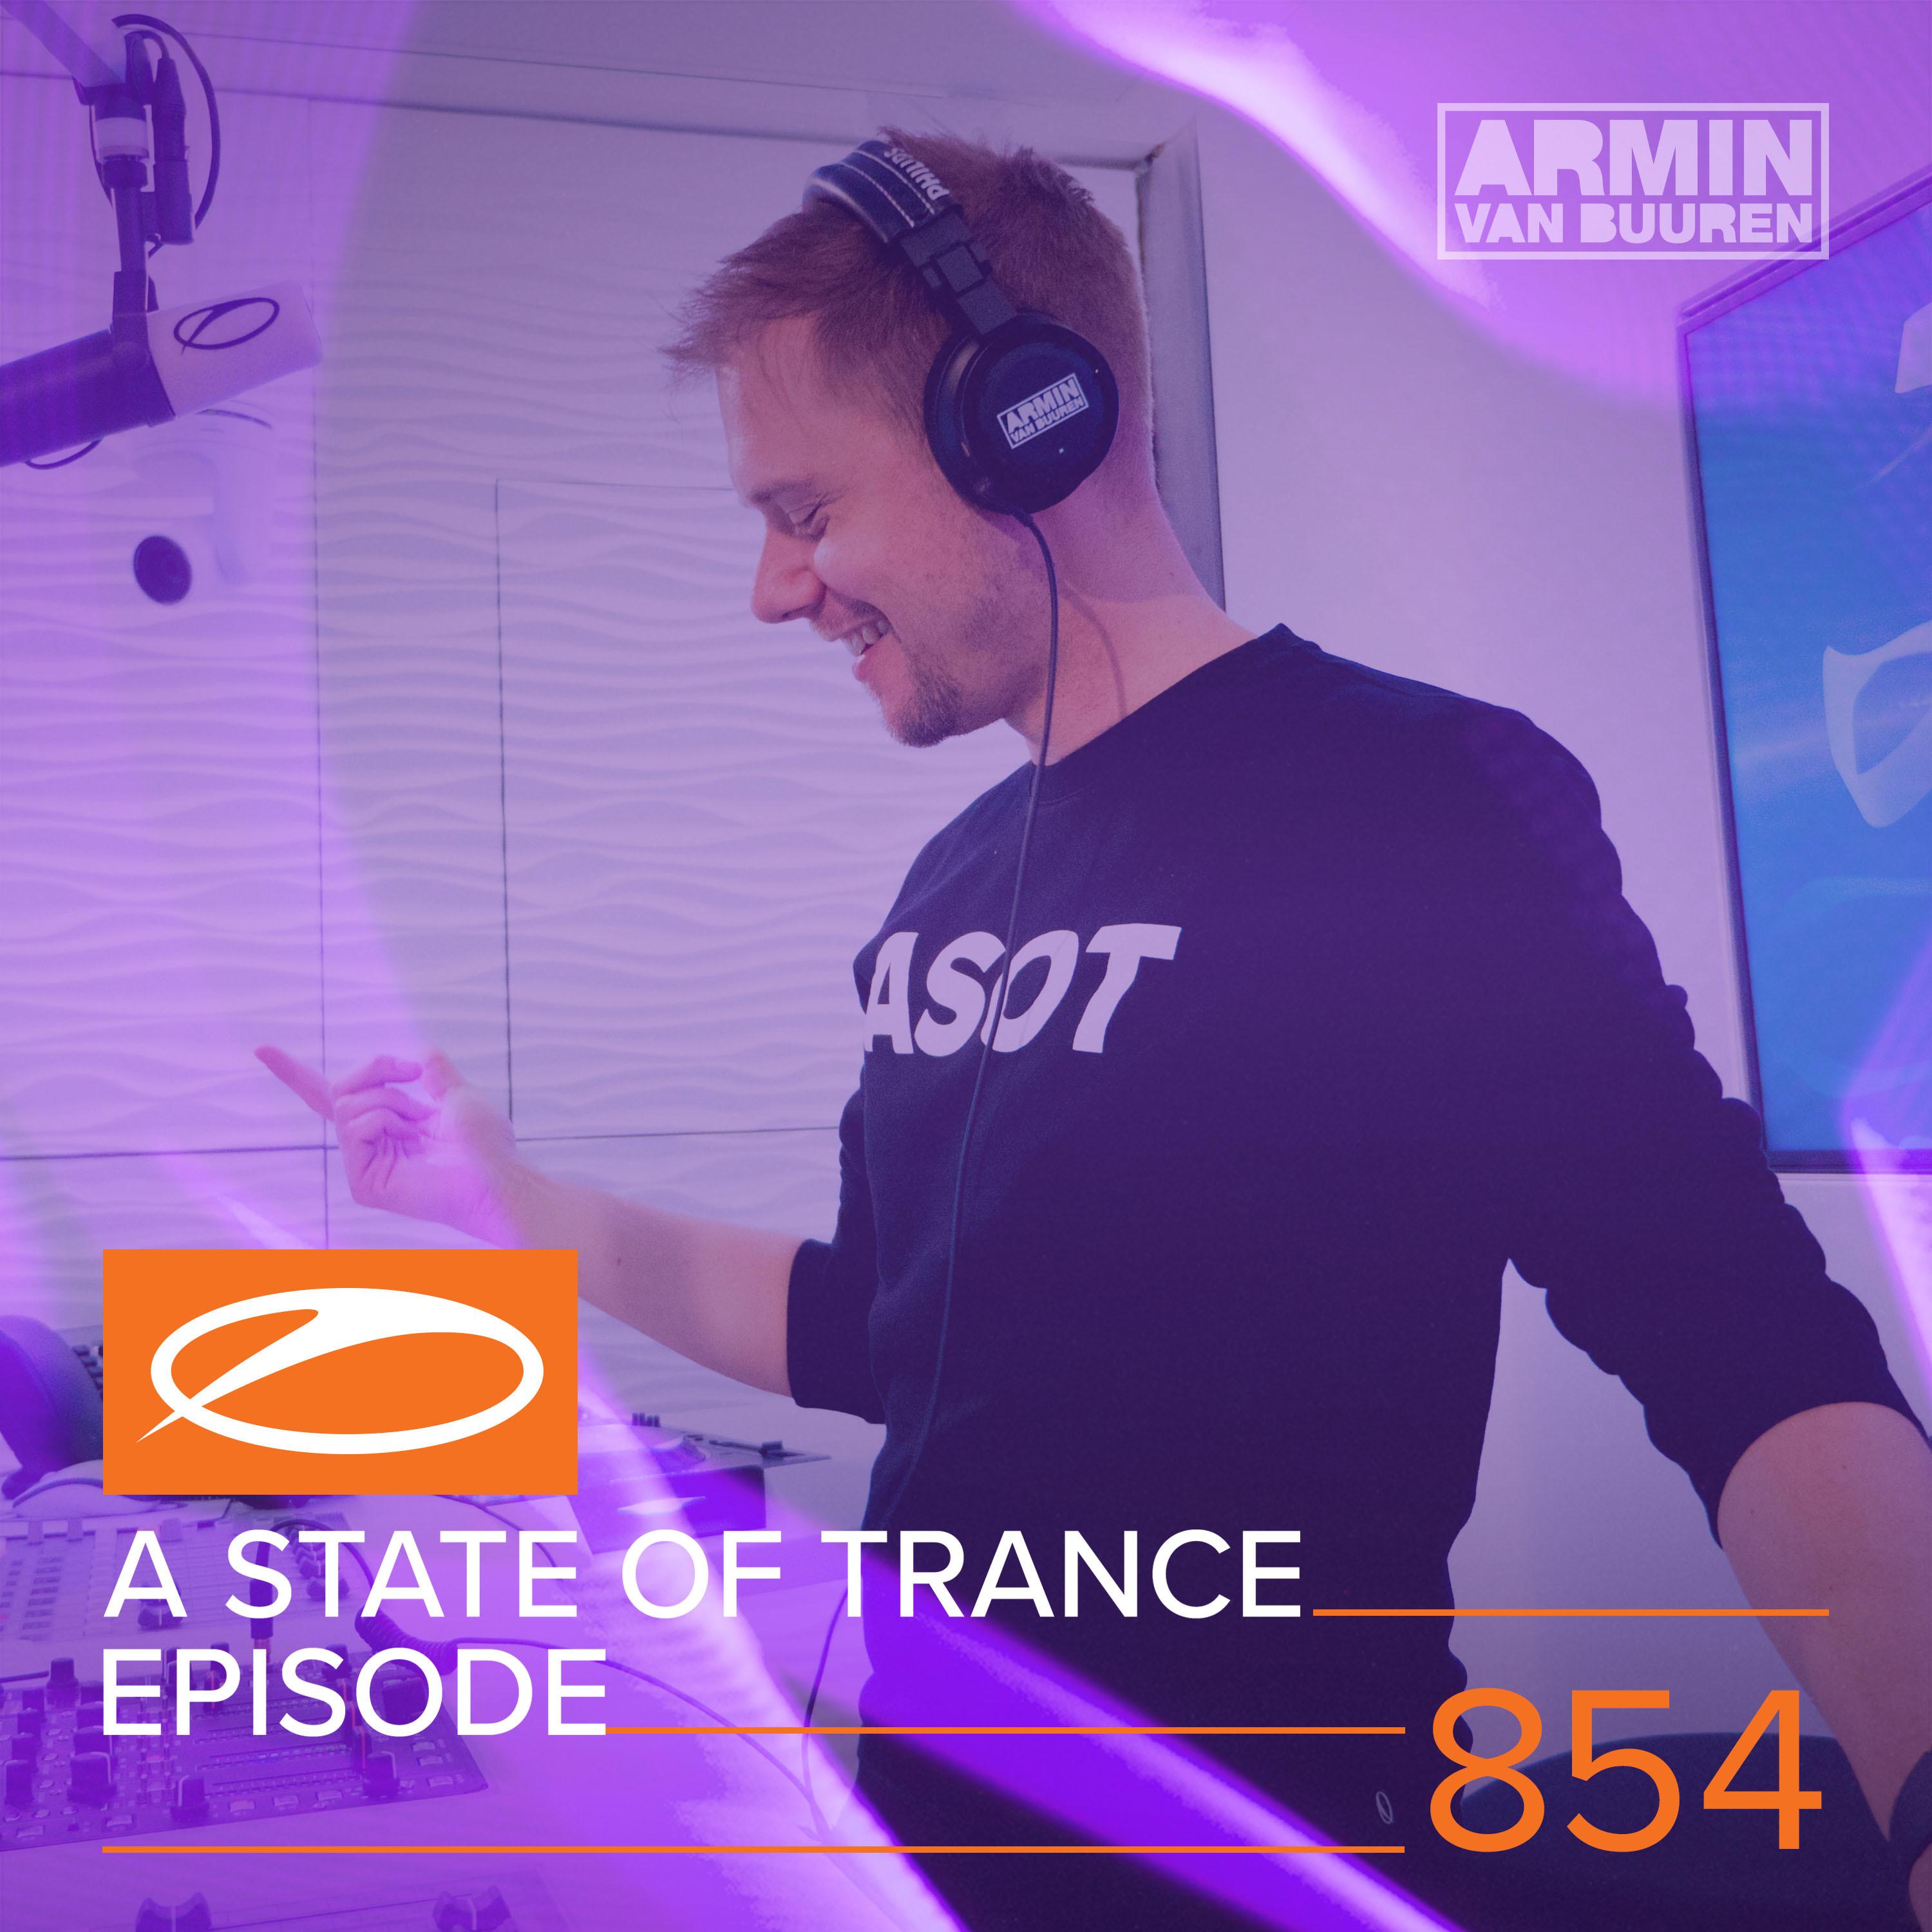 A State Of Trance Episode 854